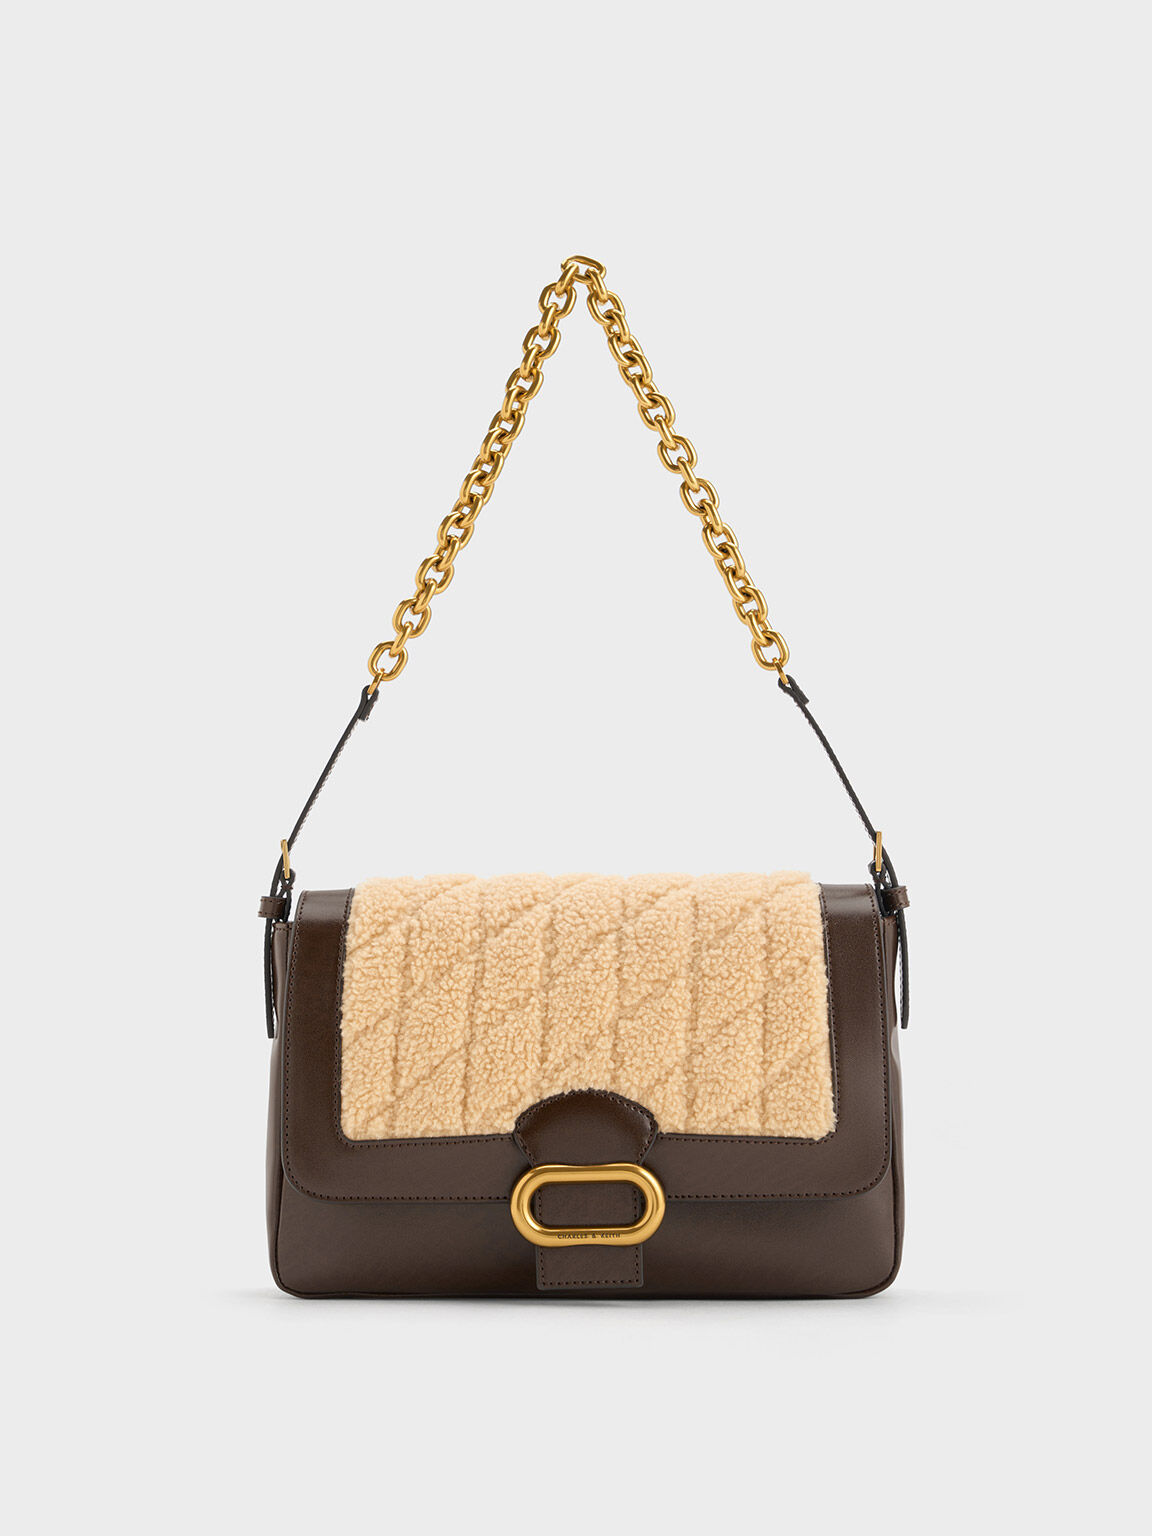 Shop the Trend - Charles & Keith Multi-Pouch Crossbody Bag